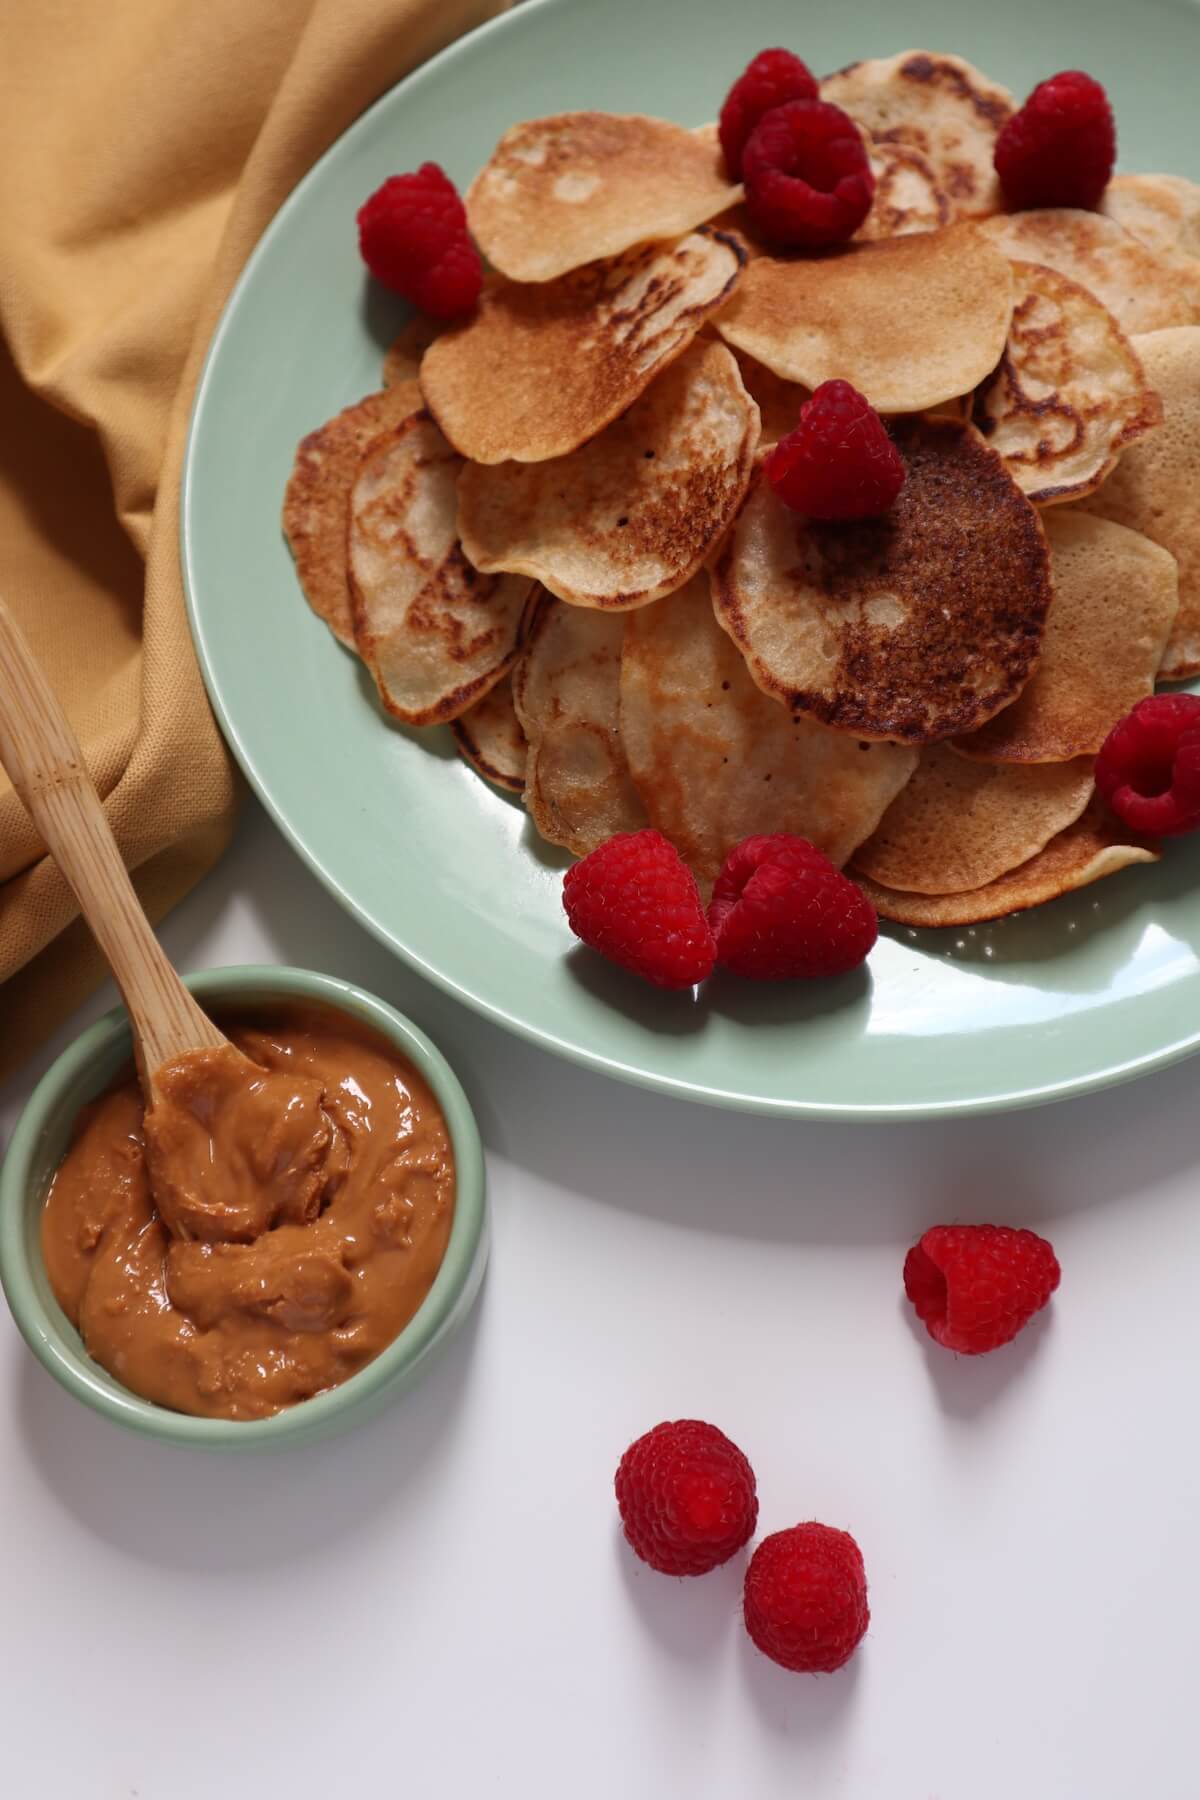 fluffly eggless pancakes on a plate with peanut butter in a bowl